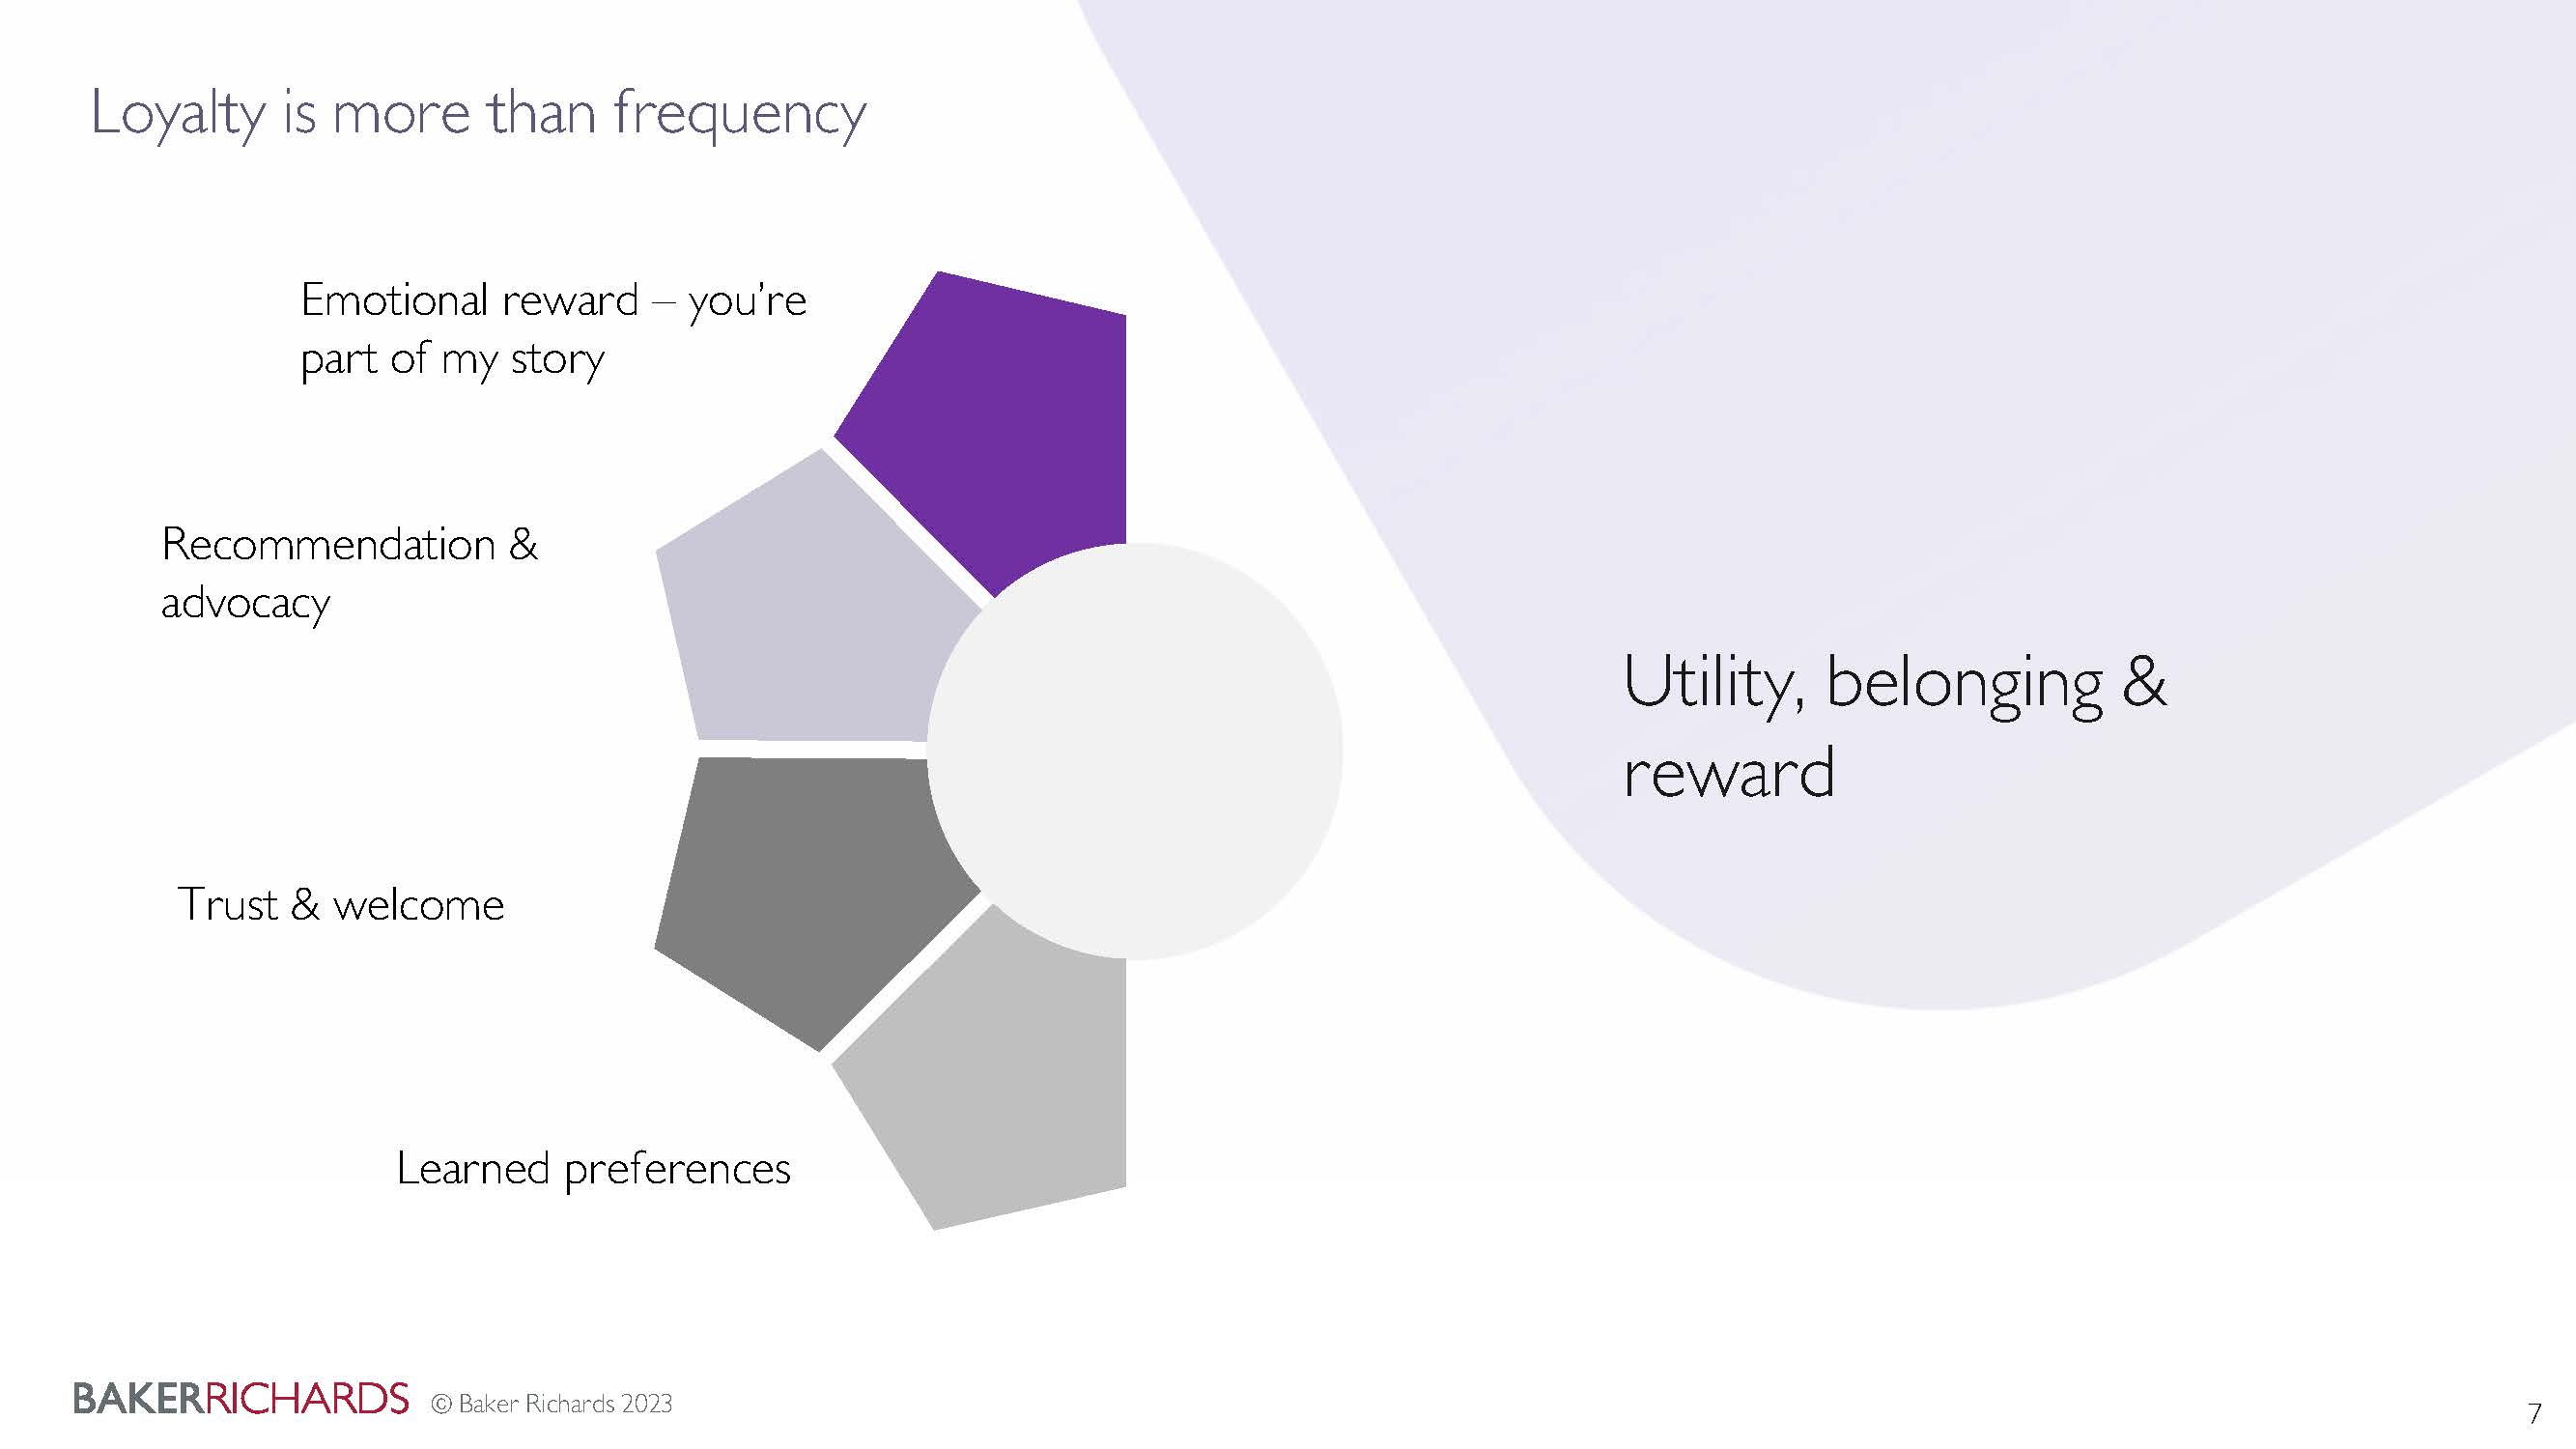 Half of a pie chart showing four facets of utility, belonging and reward: learned preferences, trust and welcome, advocacy and emotional reward.